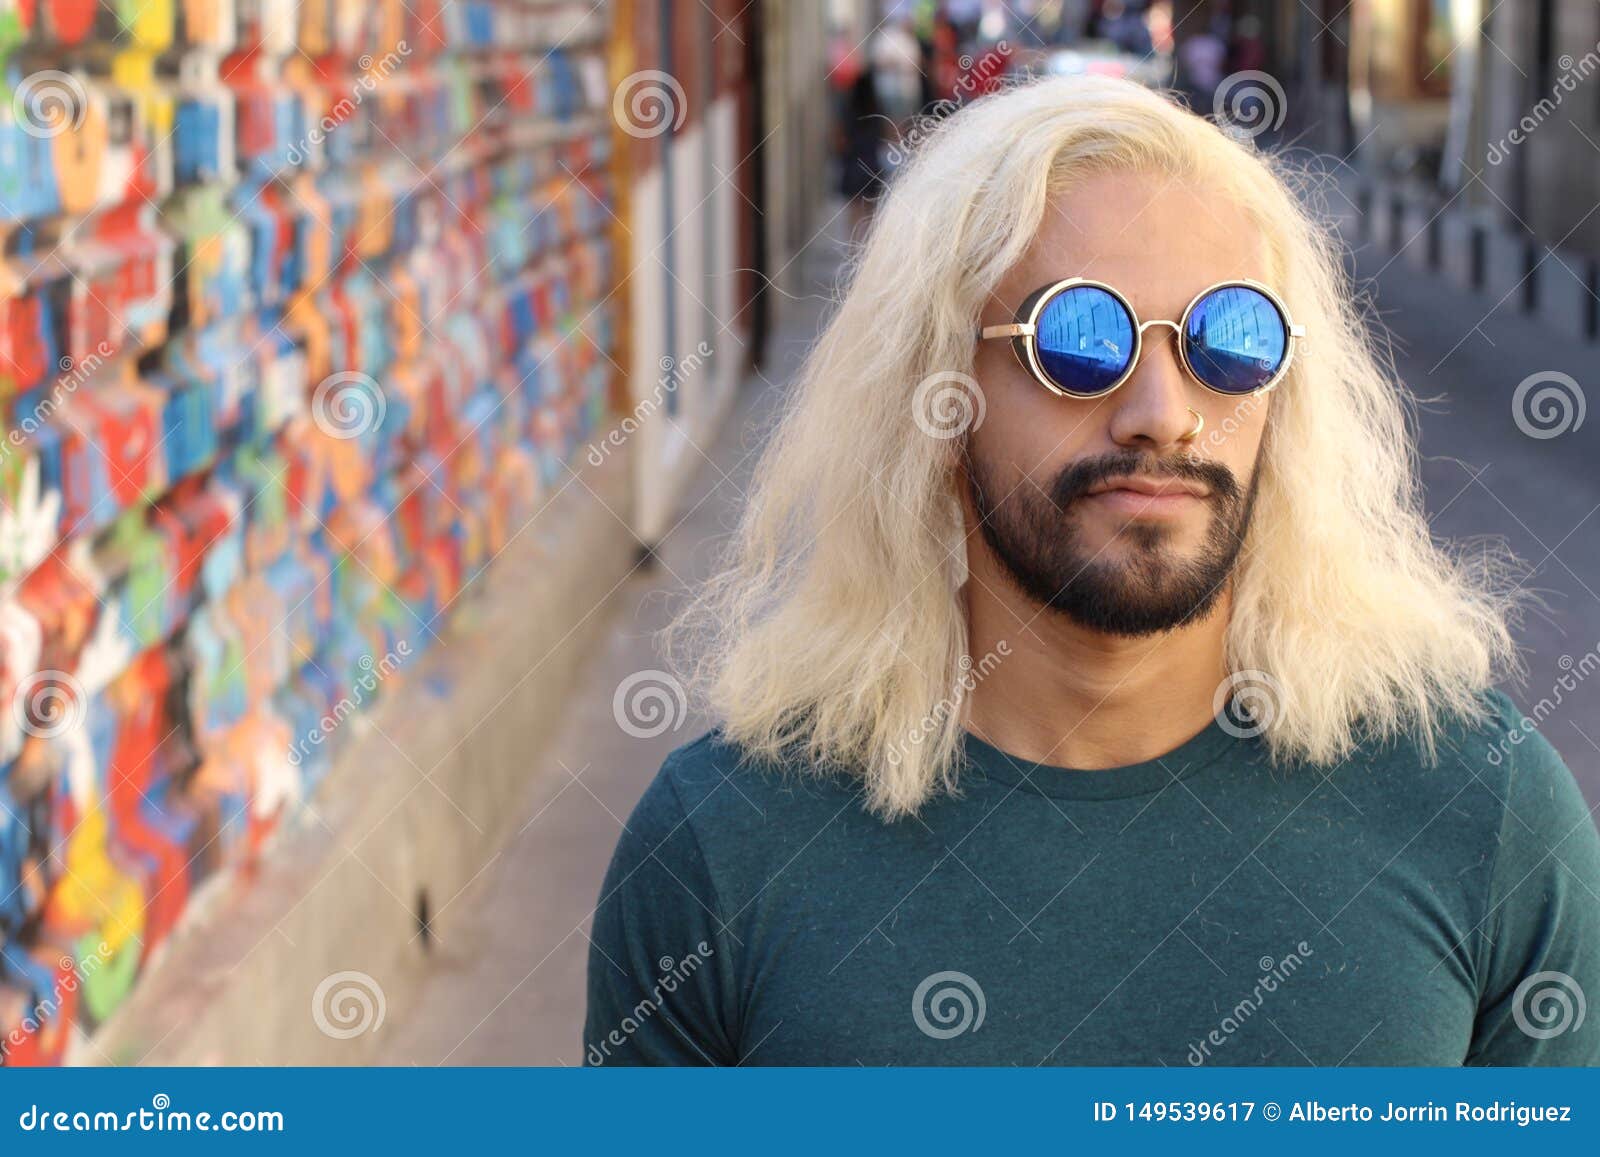 Man With Long Blonde Dyed Hair And Cool Sunglasses Stock Image